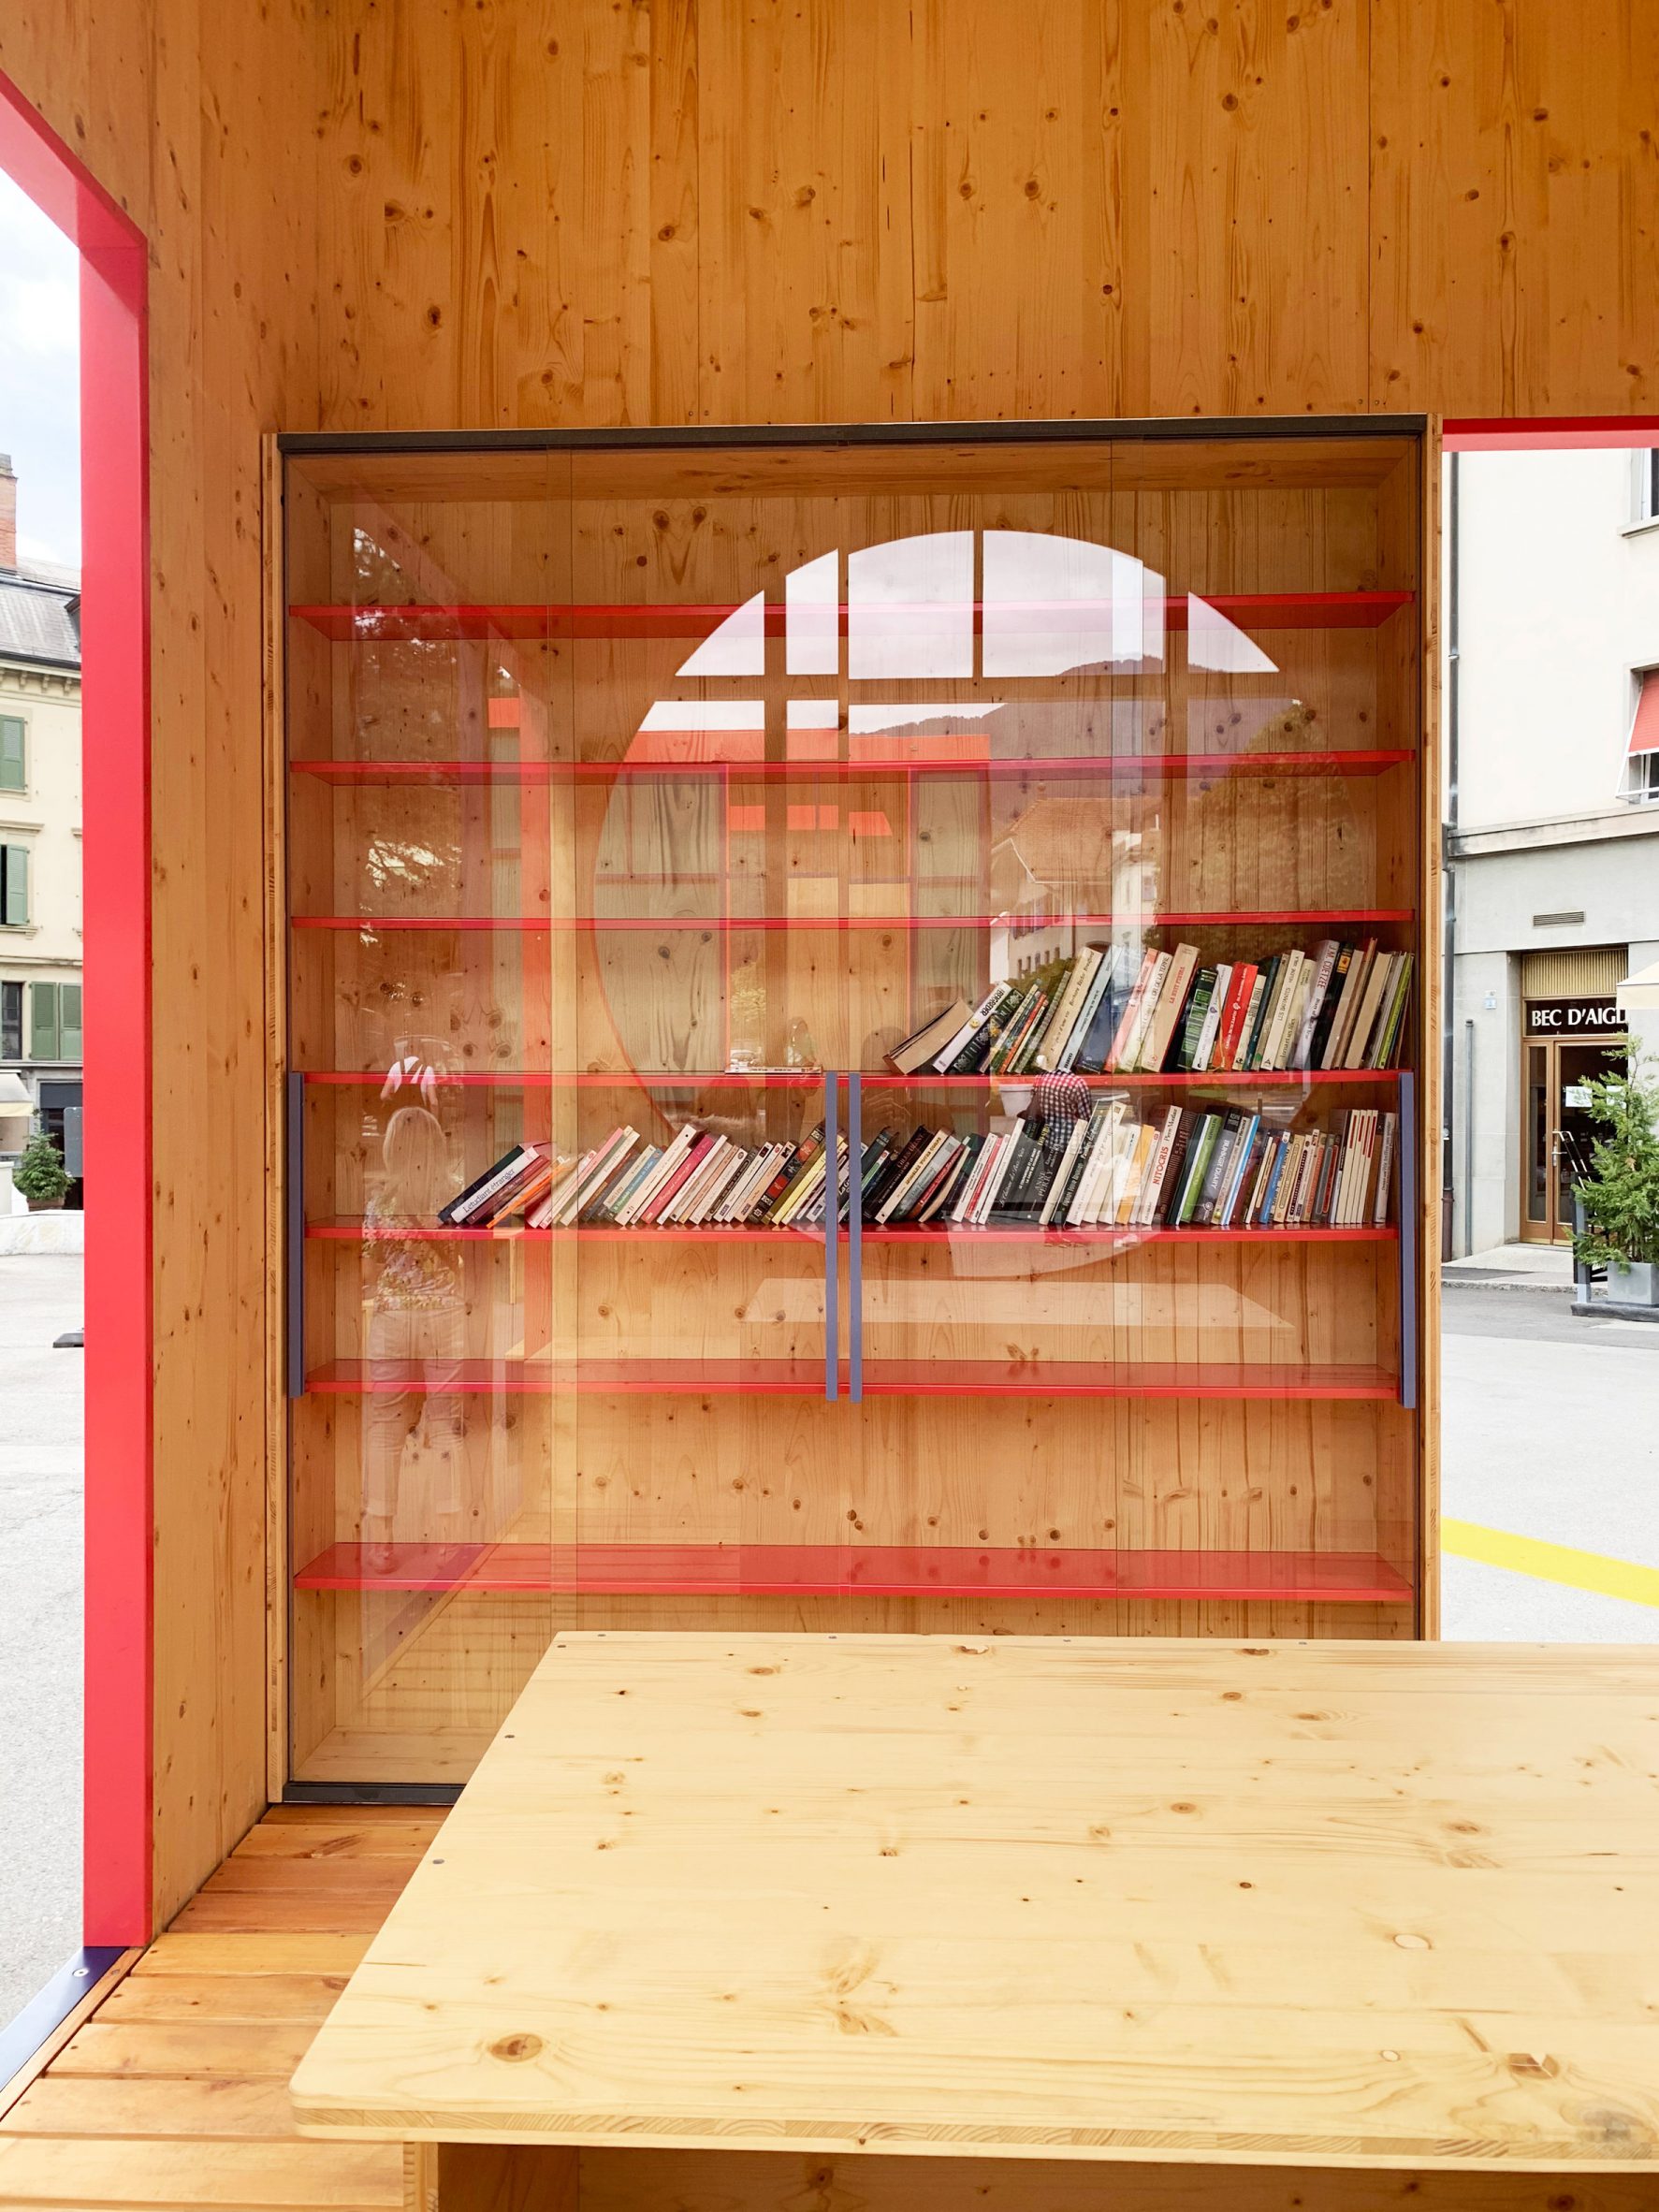 The Rotative Studio's Modular Wooden Pavilions Have Brightened The Swiss Town Square.